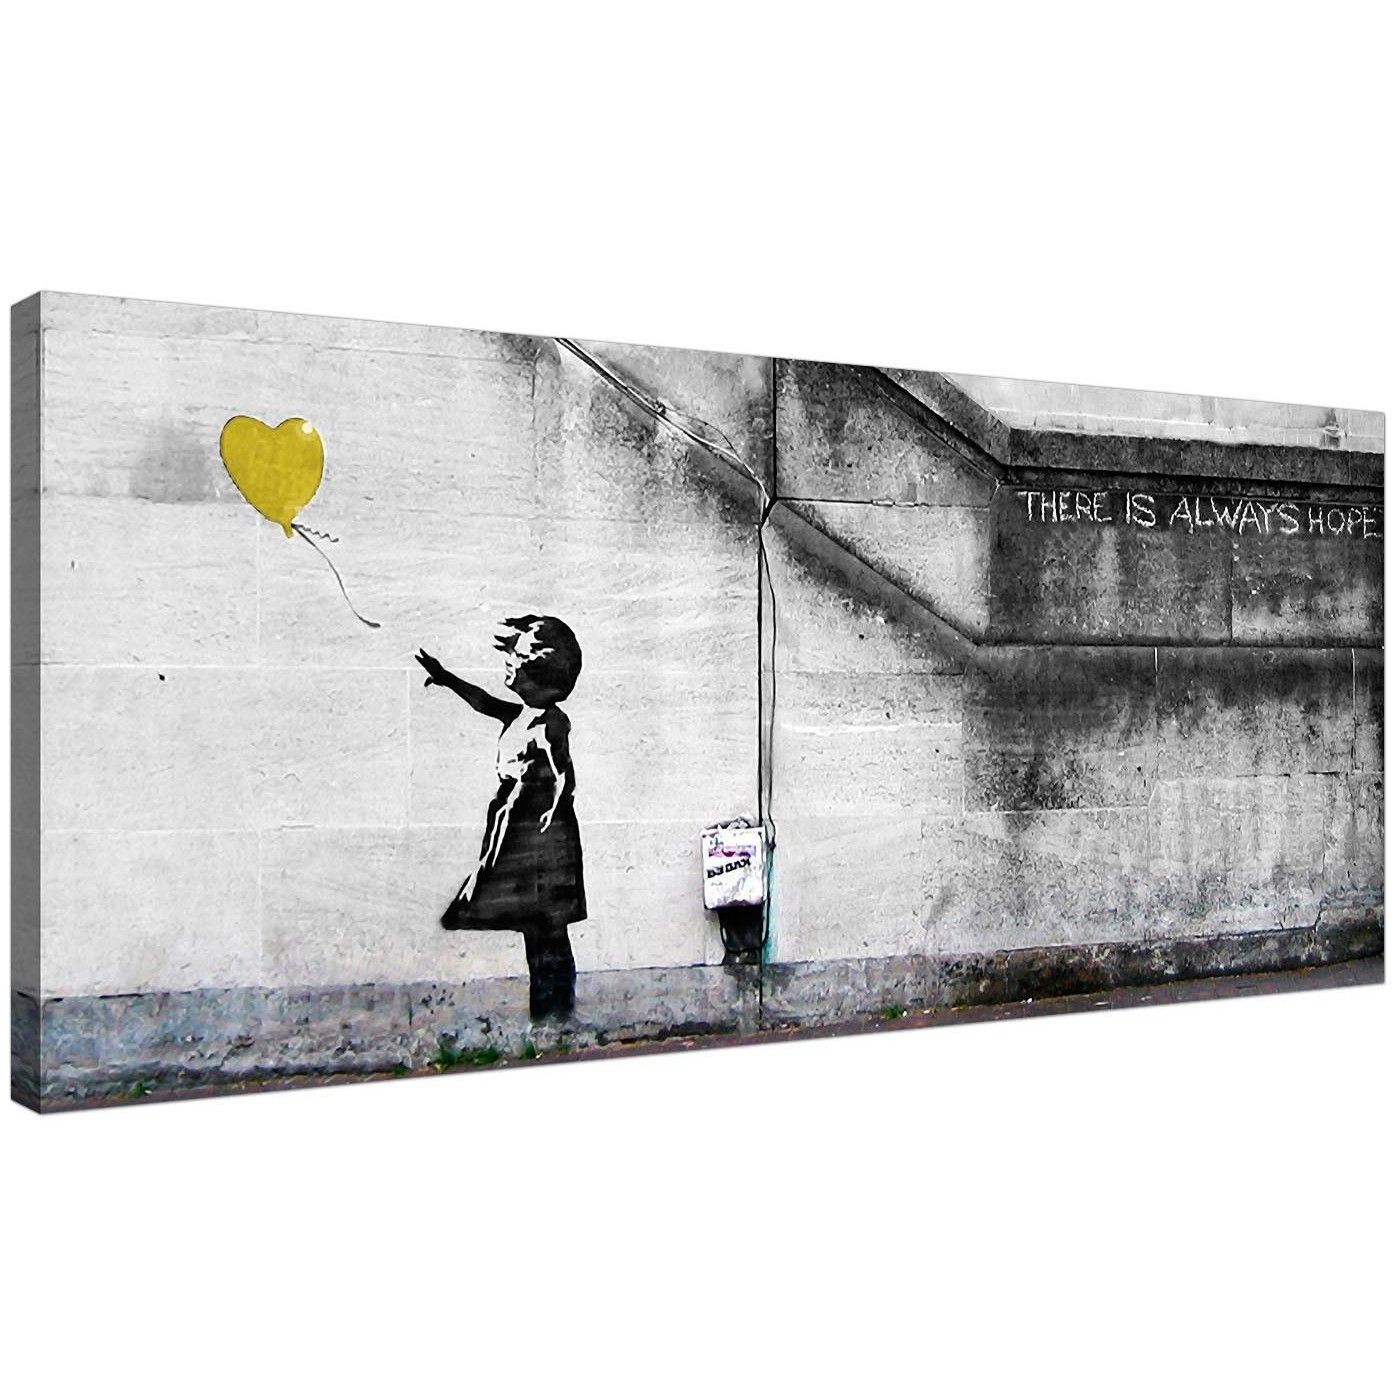 Cheap Yellow Canvas Art Of Banksy Balloon Girl For Yellow And Grey Wall Art (View 15 of 20)